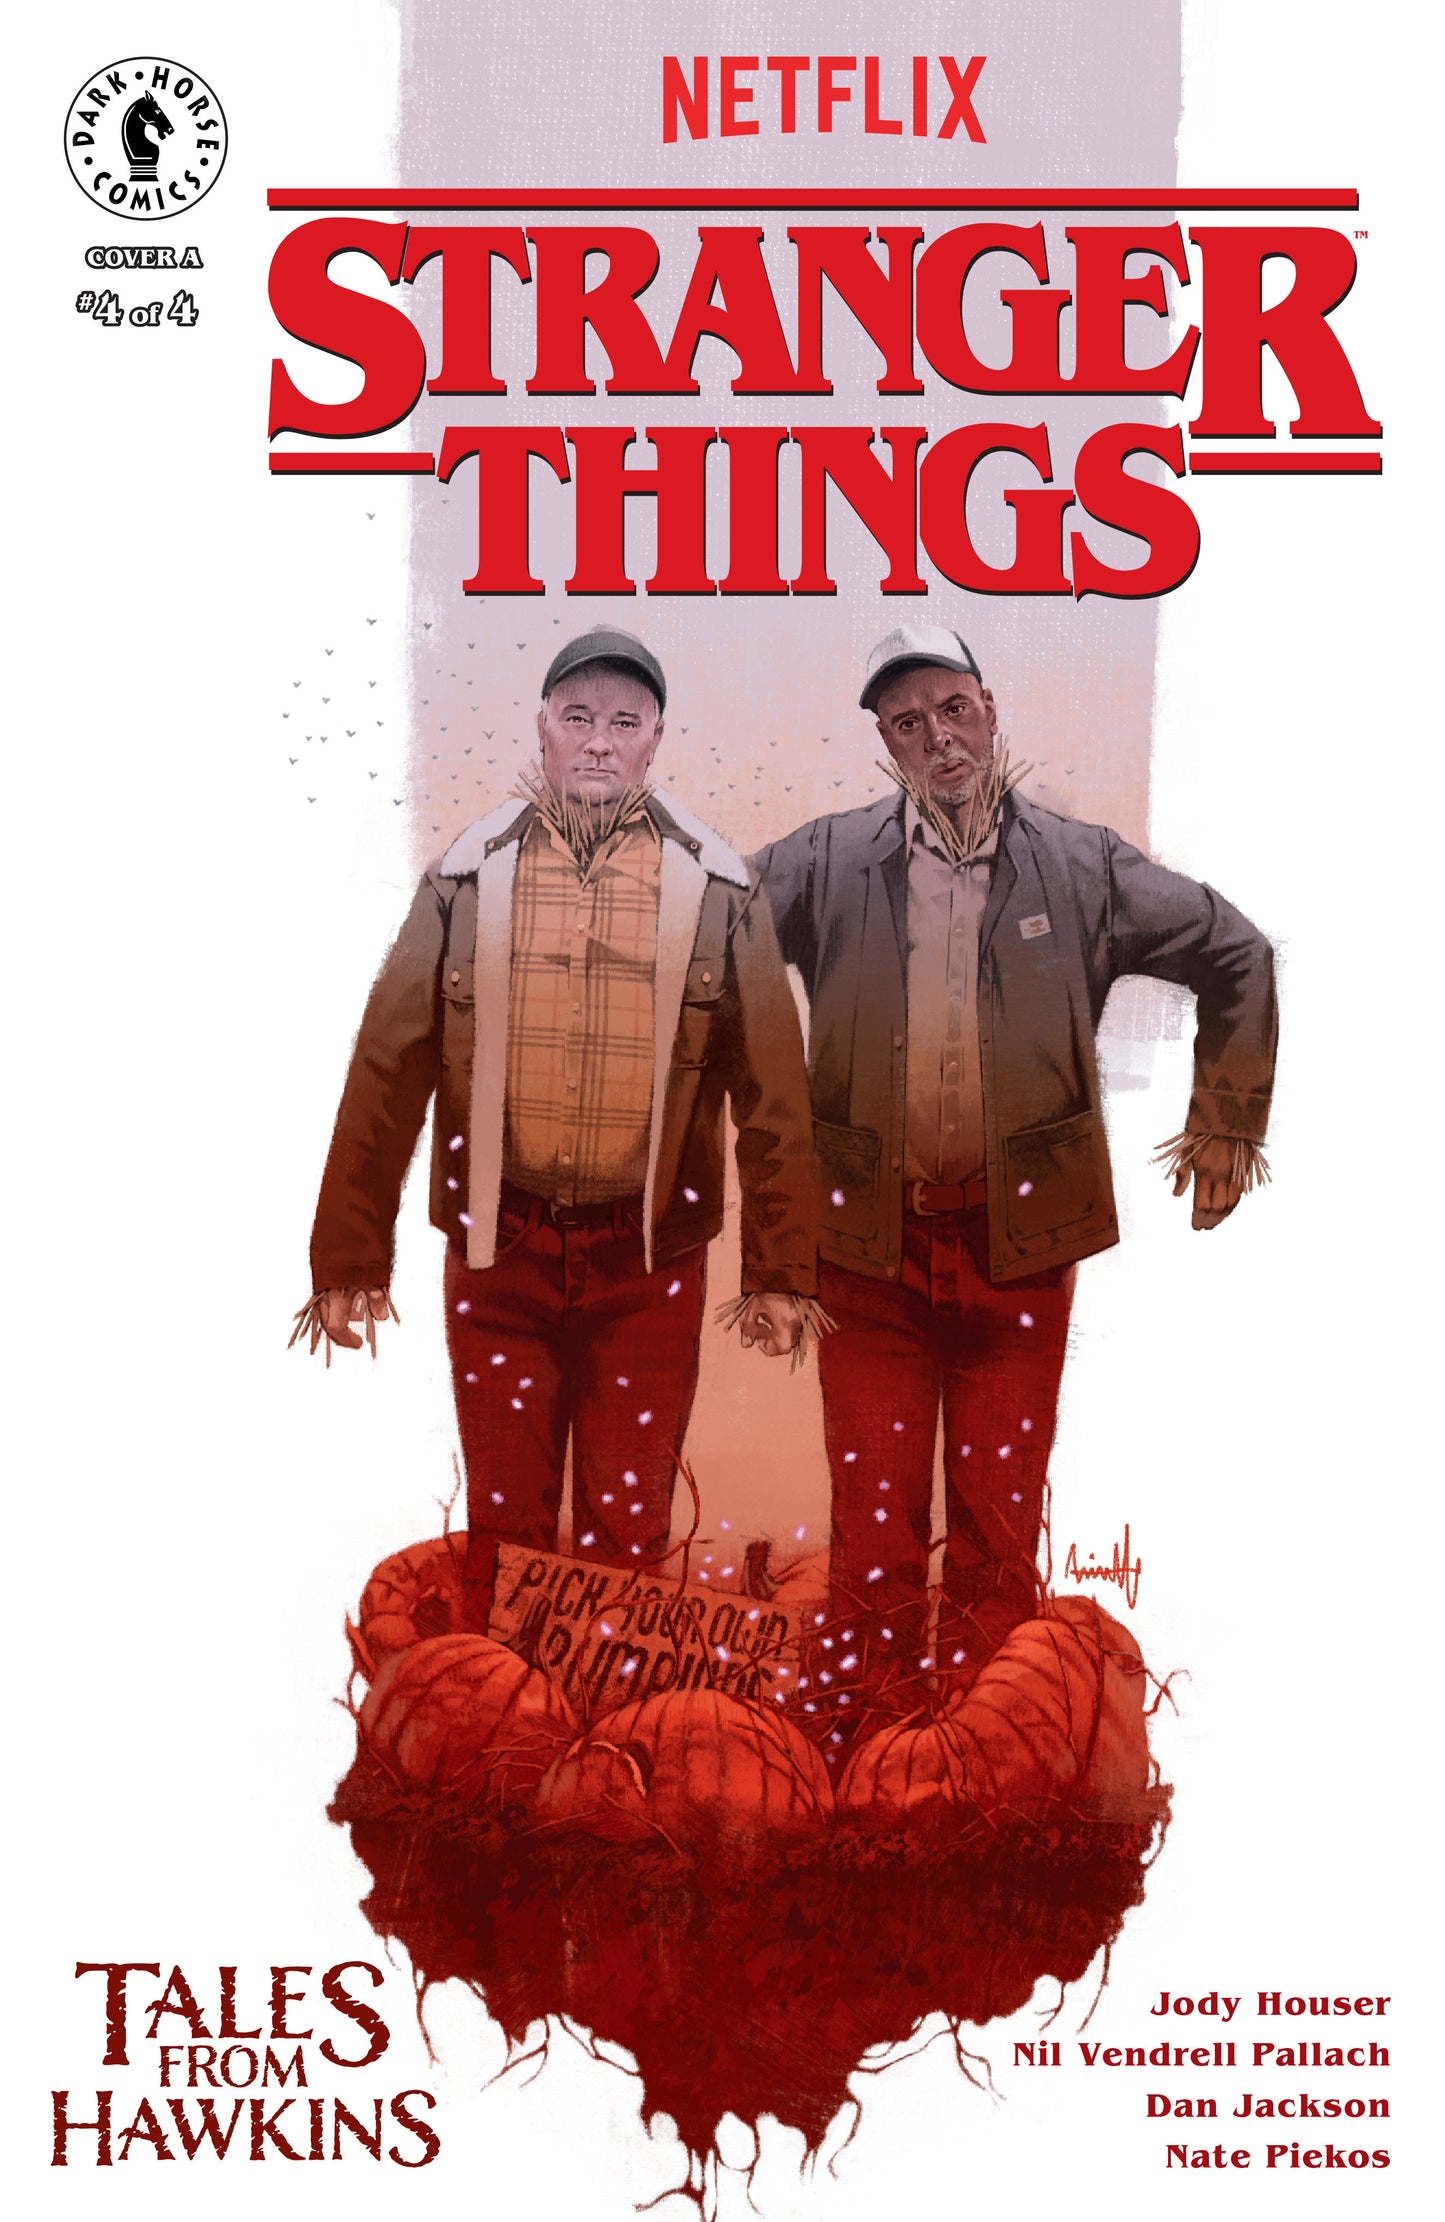 Stranger Things: Tales from Hawkins #4 (CVR A) (Marc Aspinall)